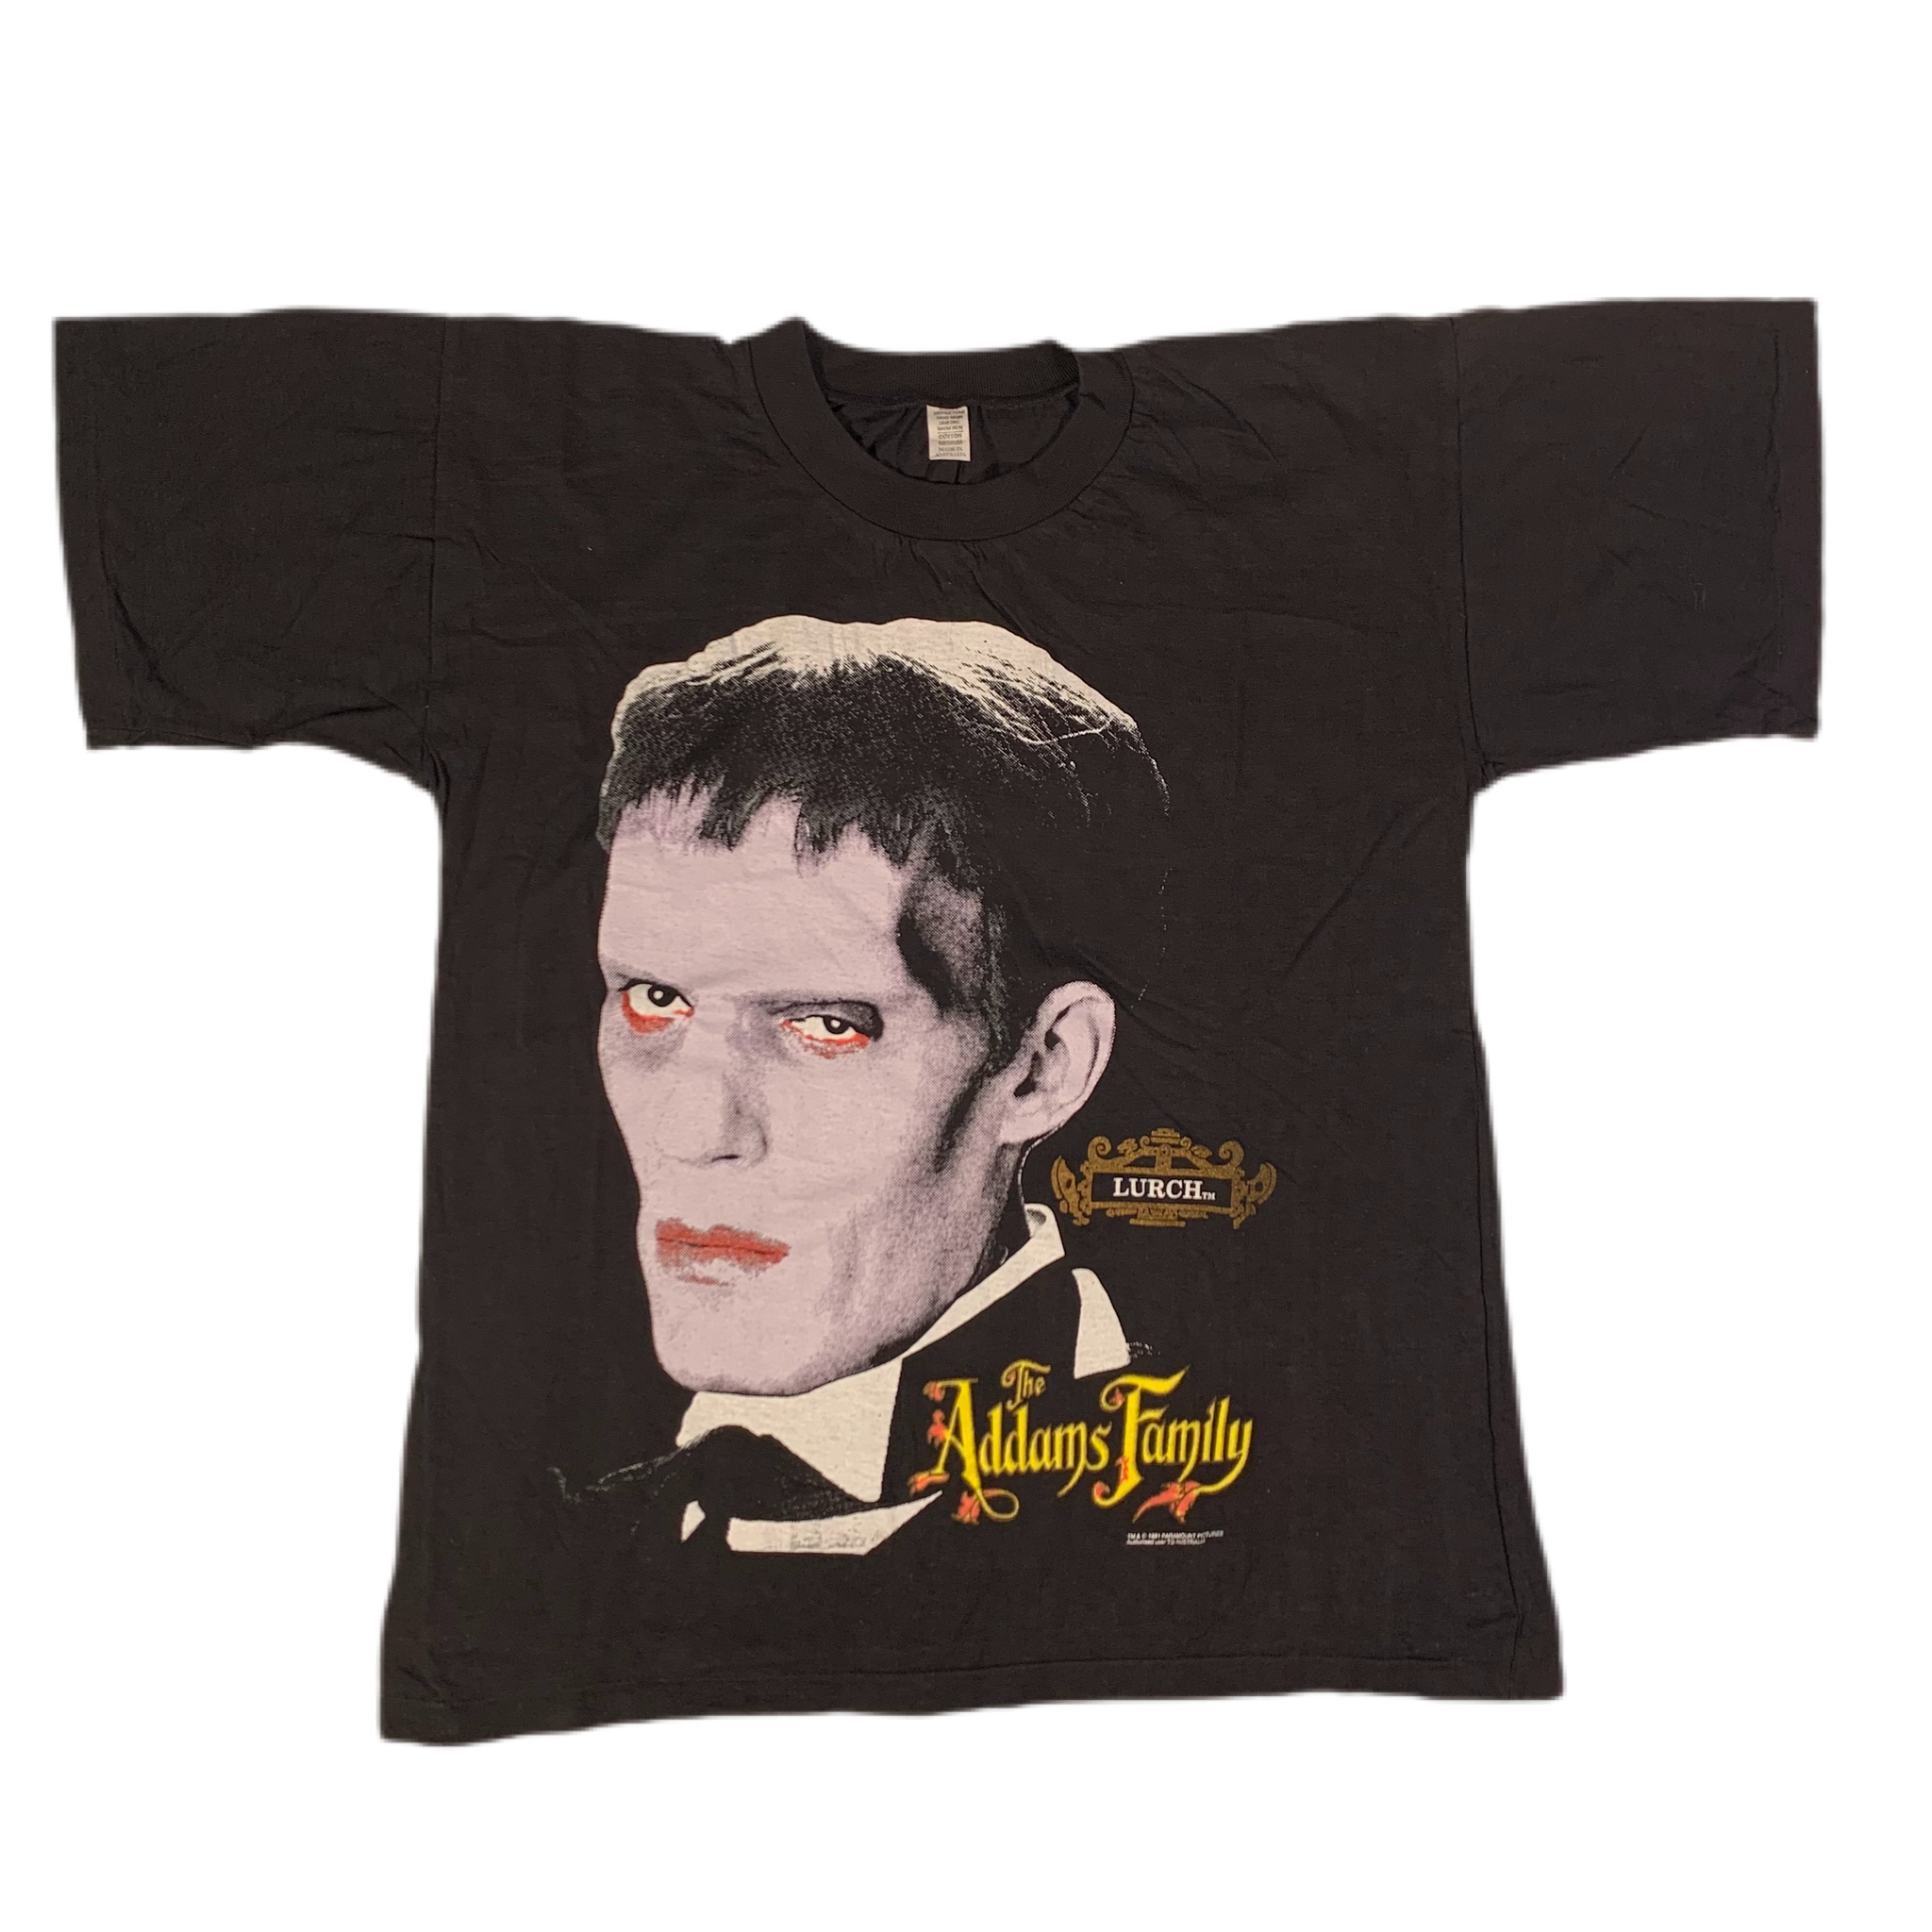 Vintage The Family "Lurch" Paramount Pictures Promotional T-Shirt |